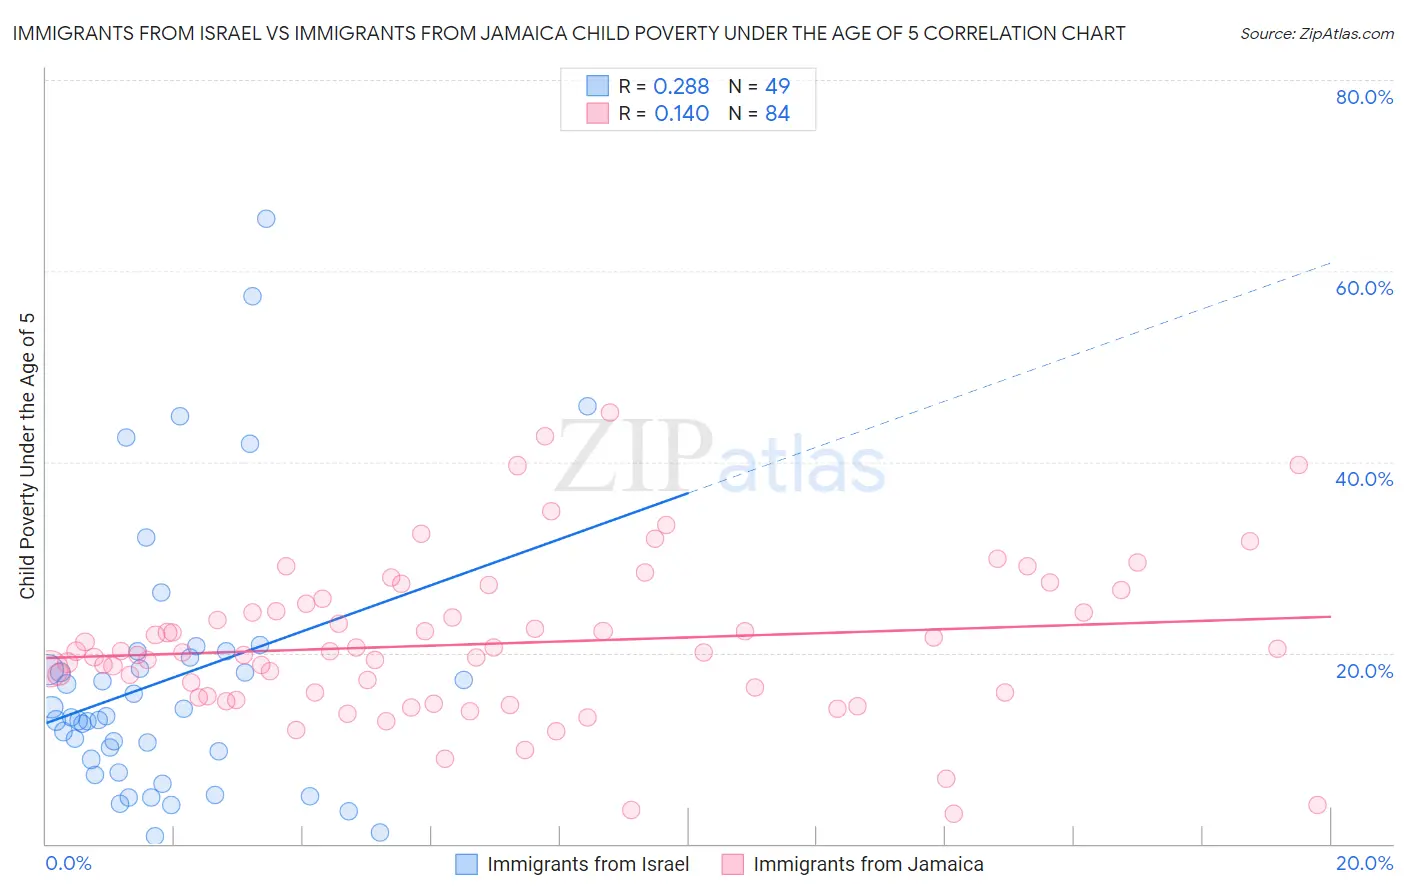 Immigrants from Israel vs Immigrants from Jamaica Child Poverty Under the Age of 5